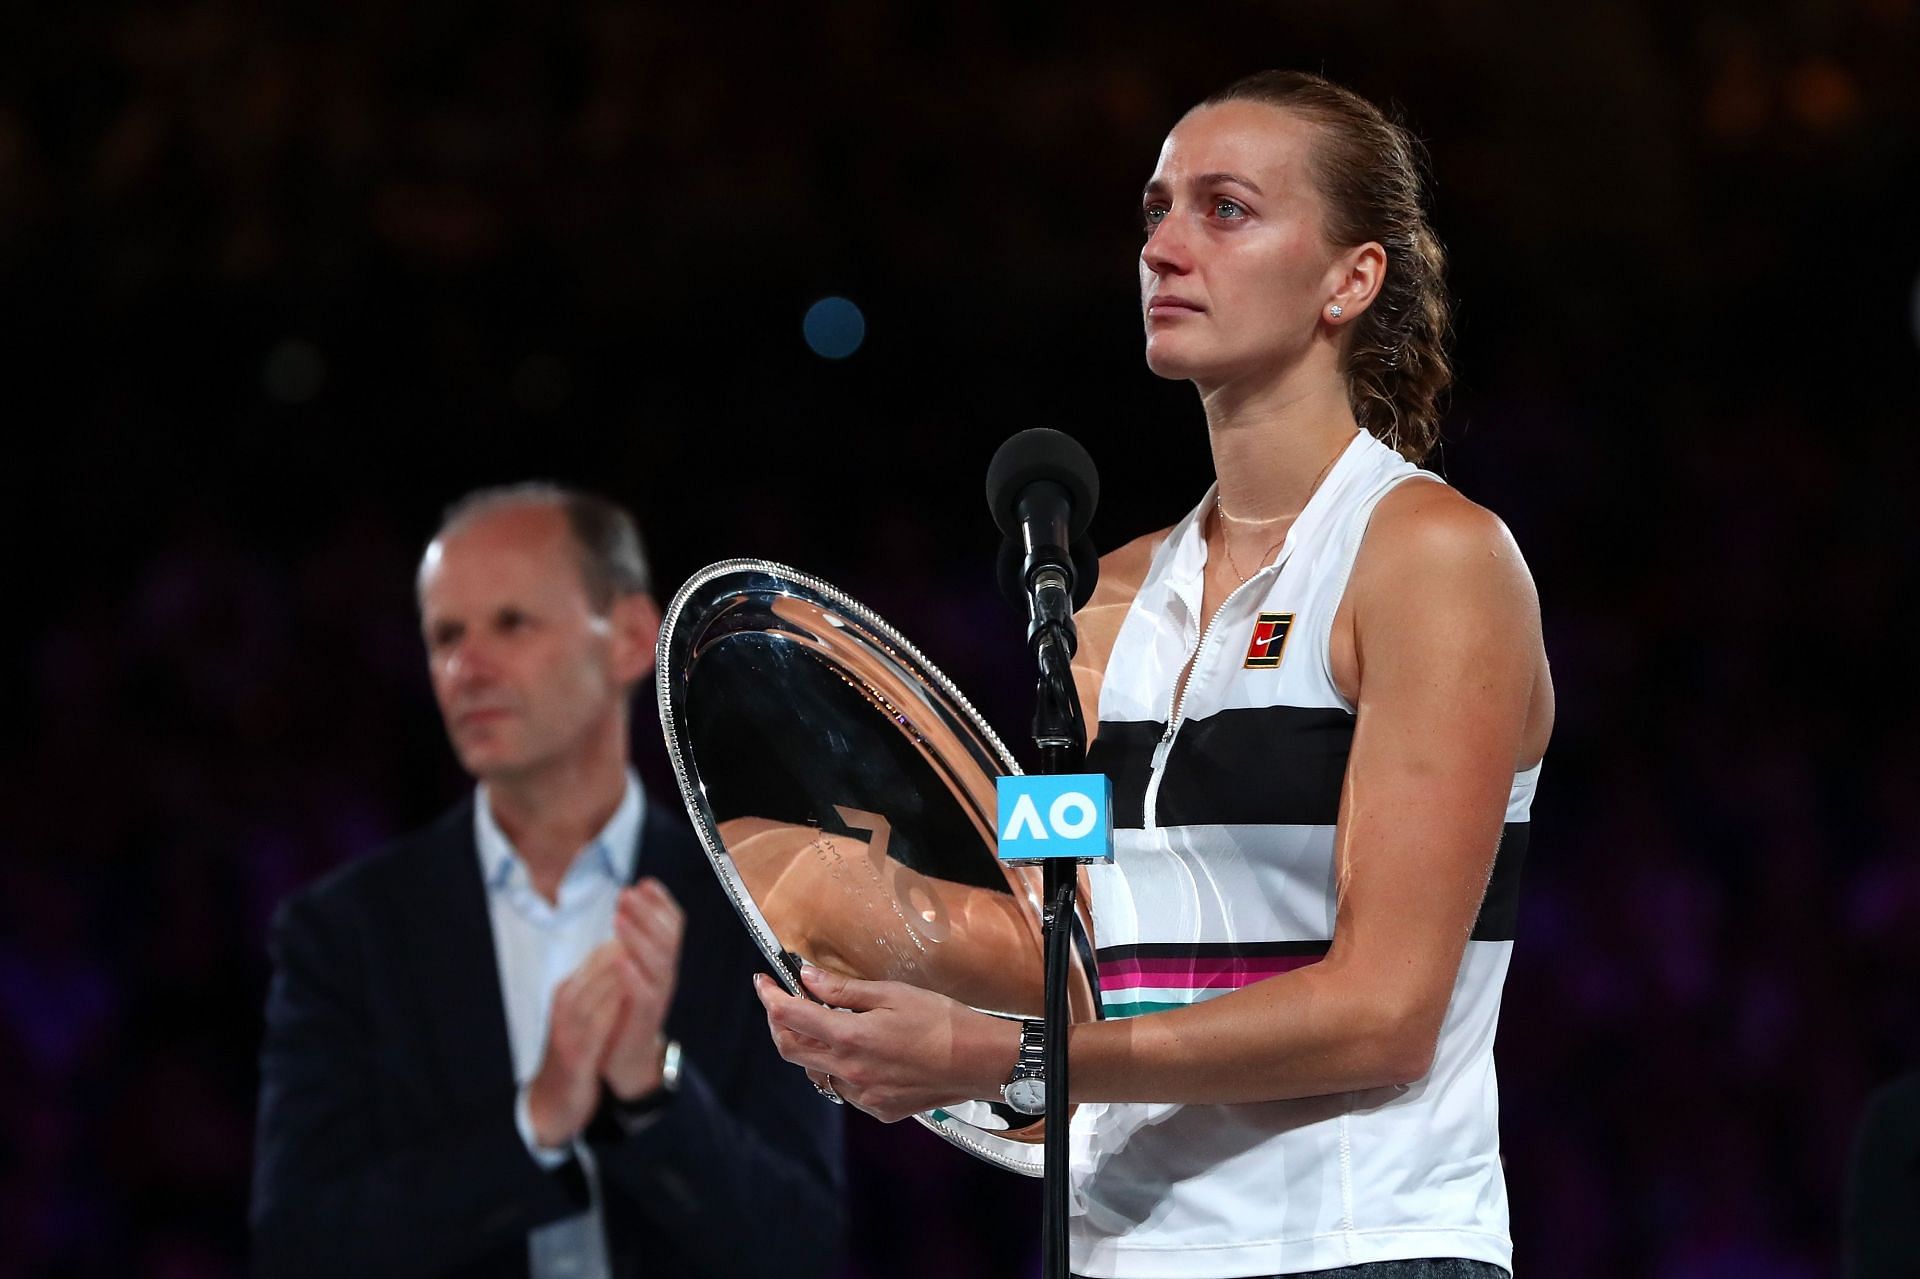 Petra Kvitova with the runner-up trophy at the 2019 Australian Open.